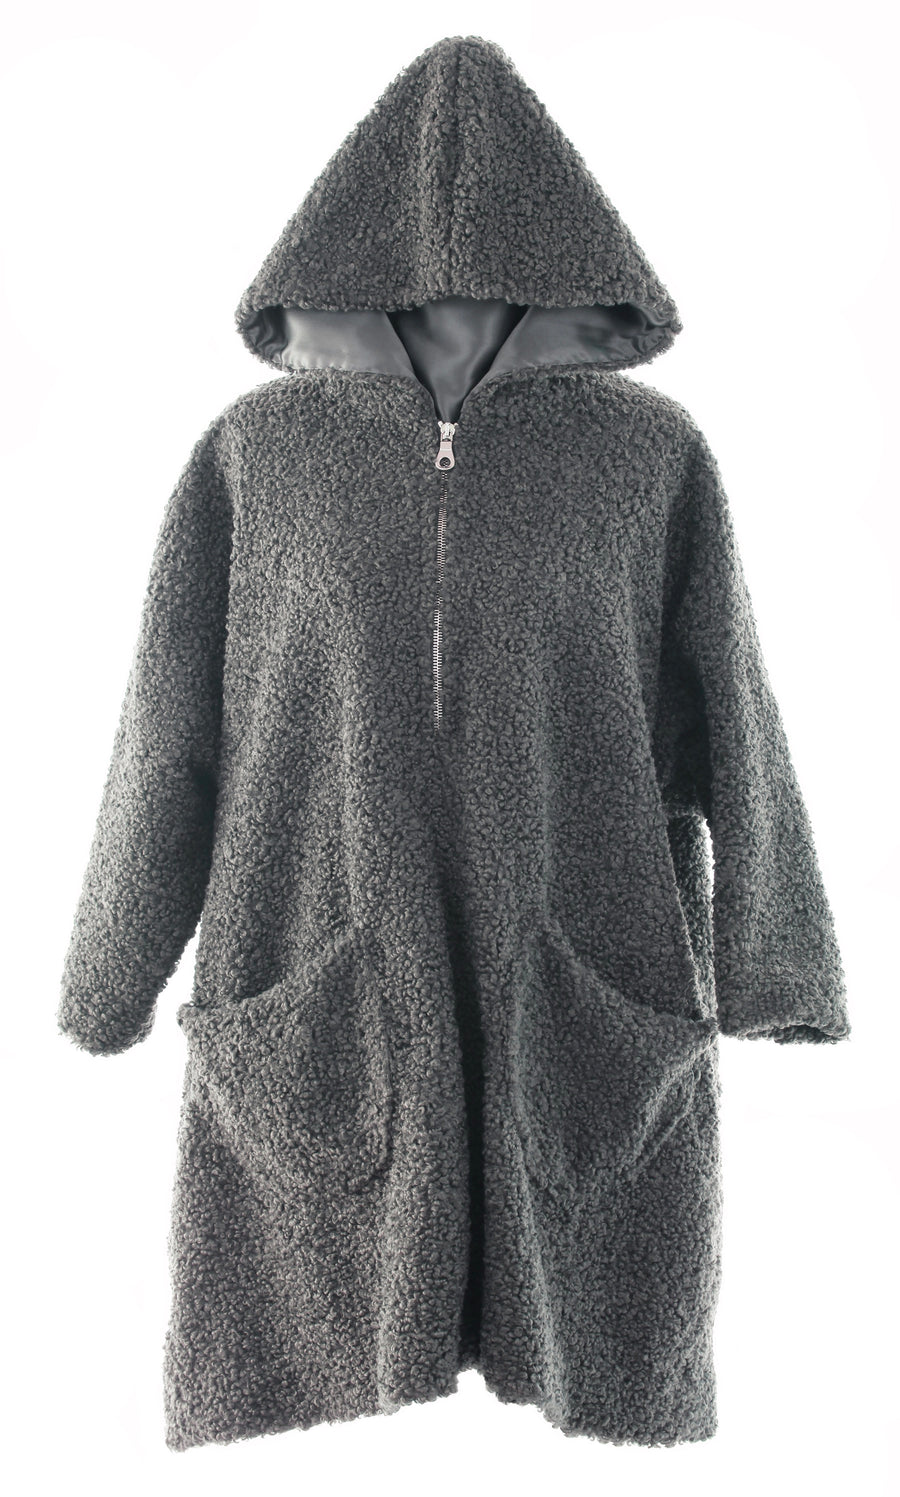 Mimi Fong Poodle Hoodie Jacket in Charcoal